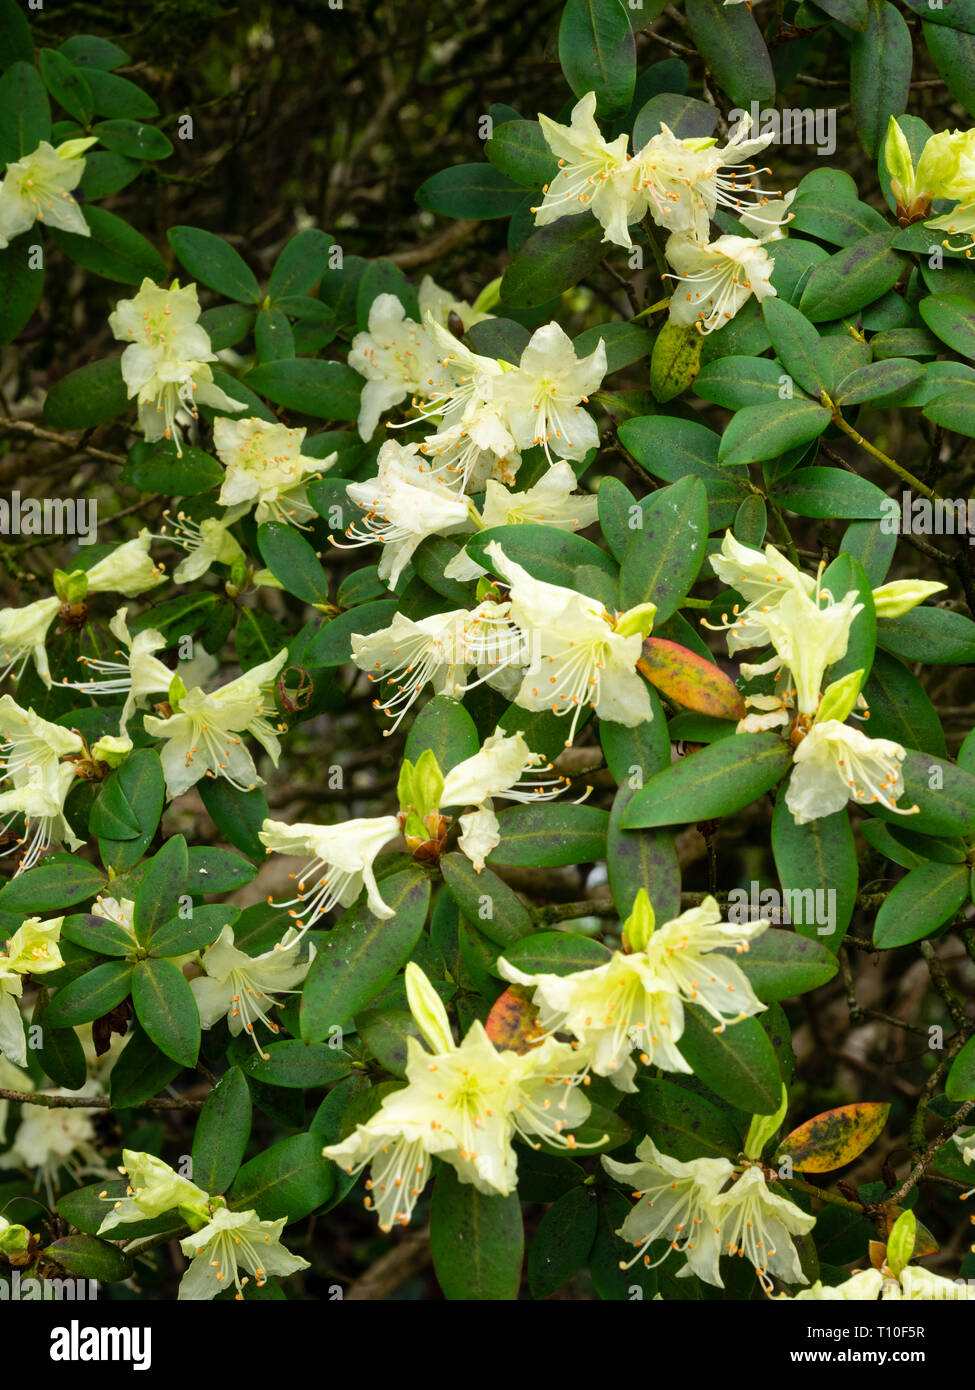 Pale yellow, early Spring flowers of the compact evergreen shrub, Rhododendron keiskei Stock Photo